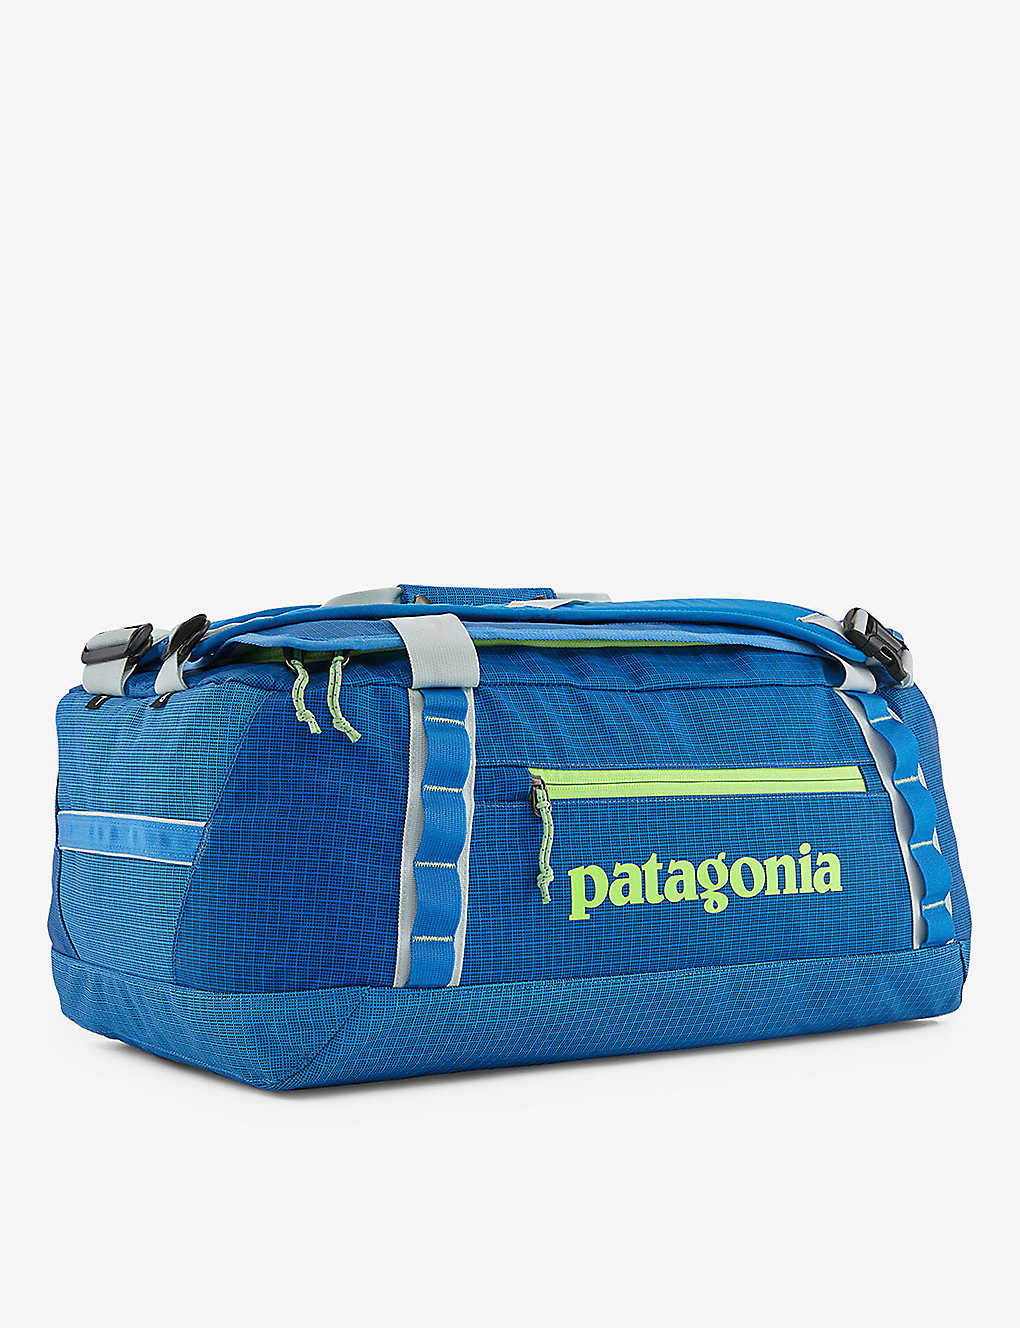 Patagonia Vessel Blue Black Hole 40l Recycled-polyester Duffle Bag